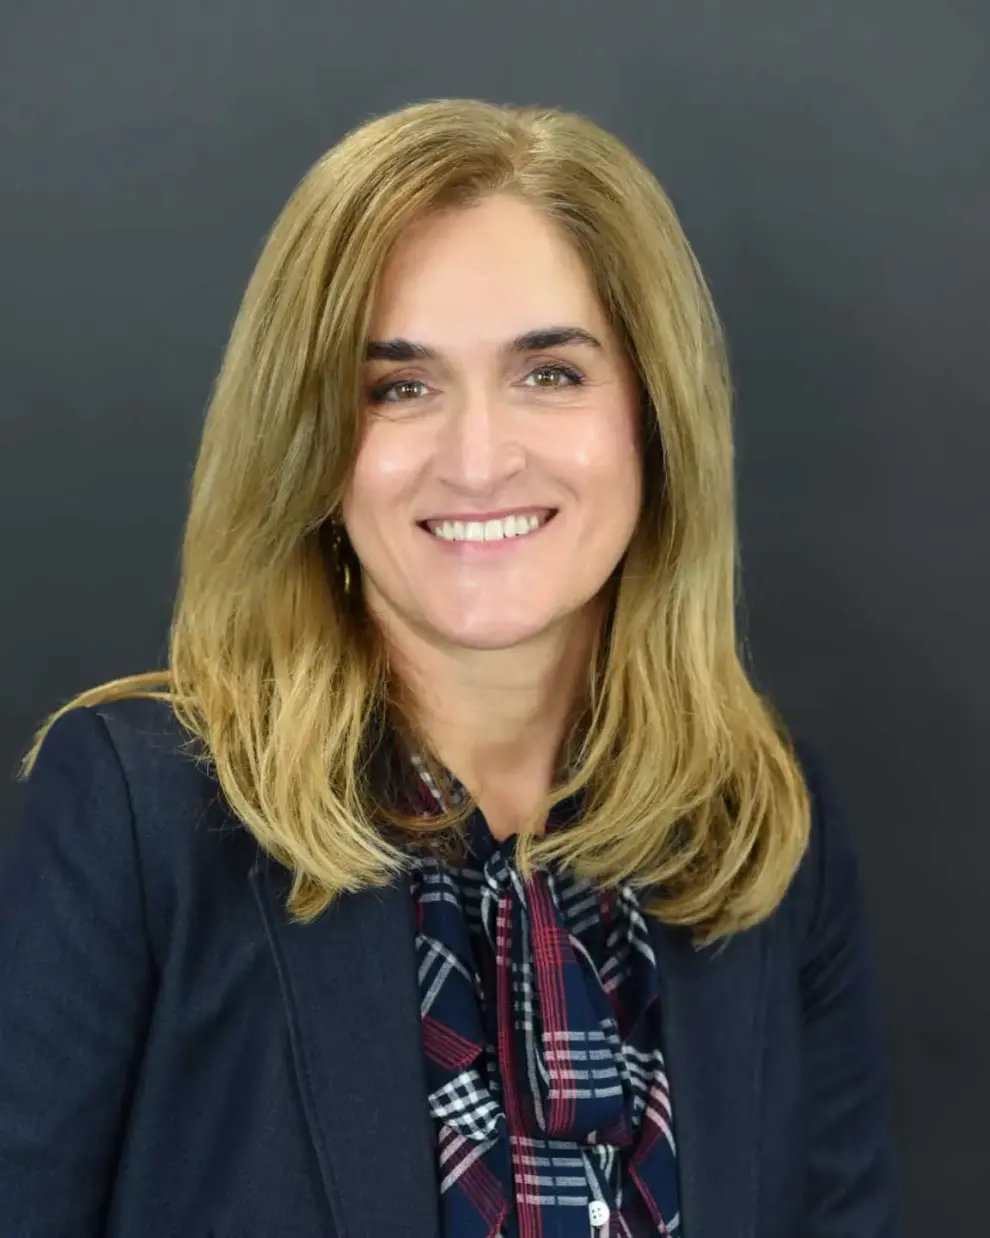 CTLGroup Promotes Giulia Alimonti, AIA, LEED AP to Principal Architect, Expands New York City Presence